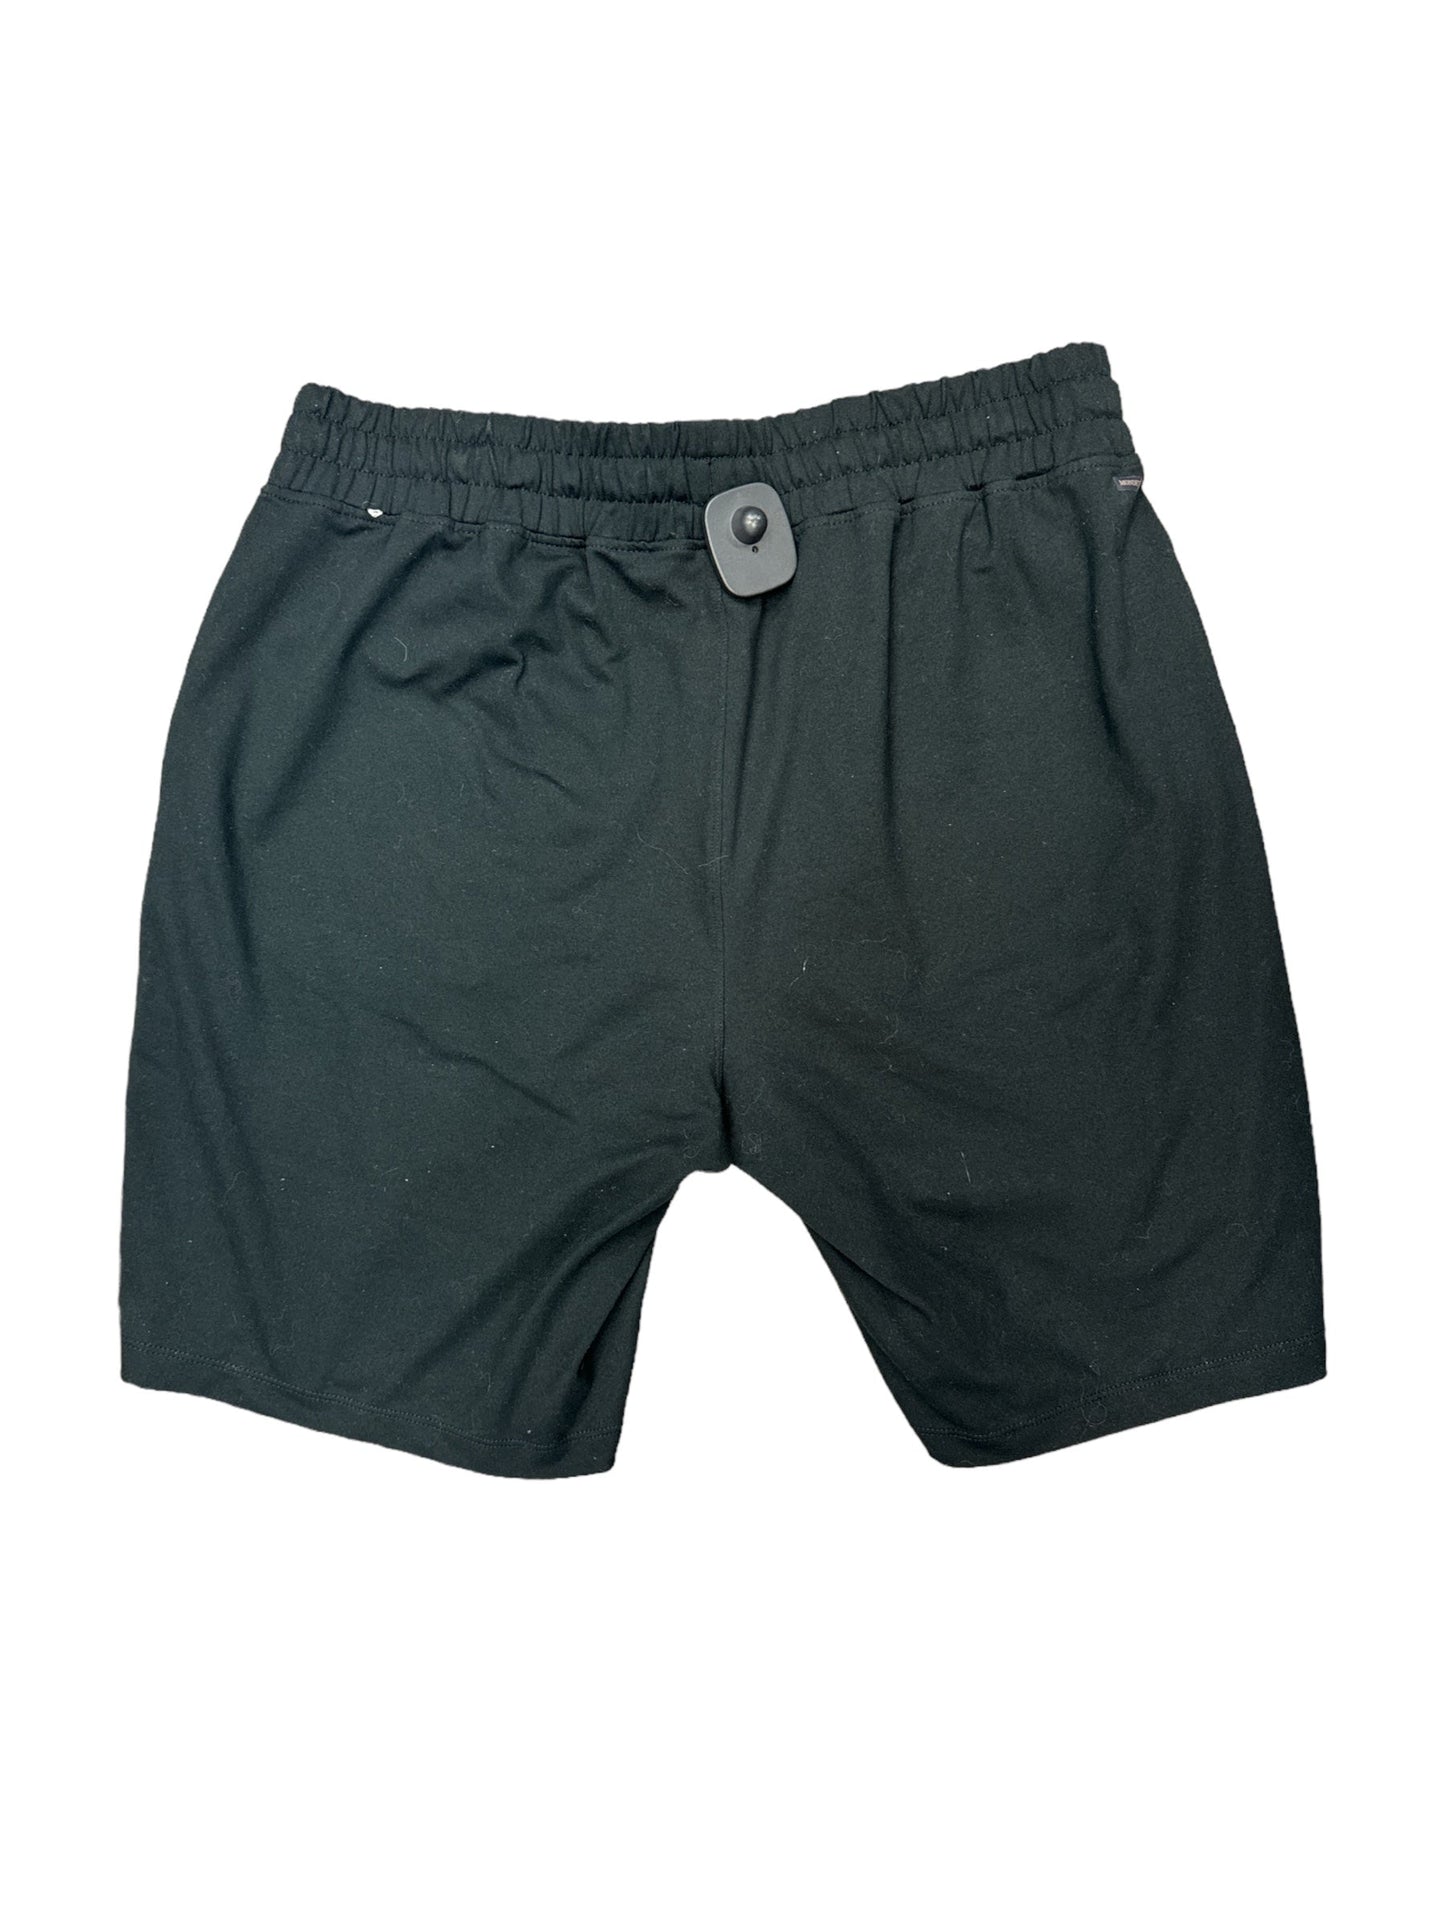 Athletic Shorts By Mondetta  Size: 10